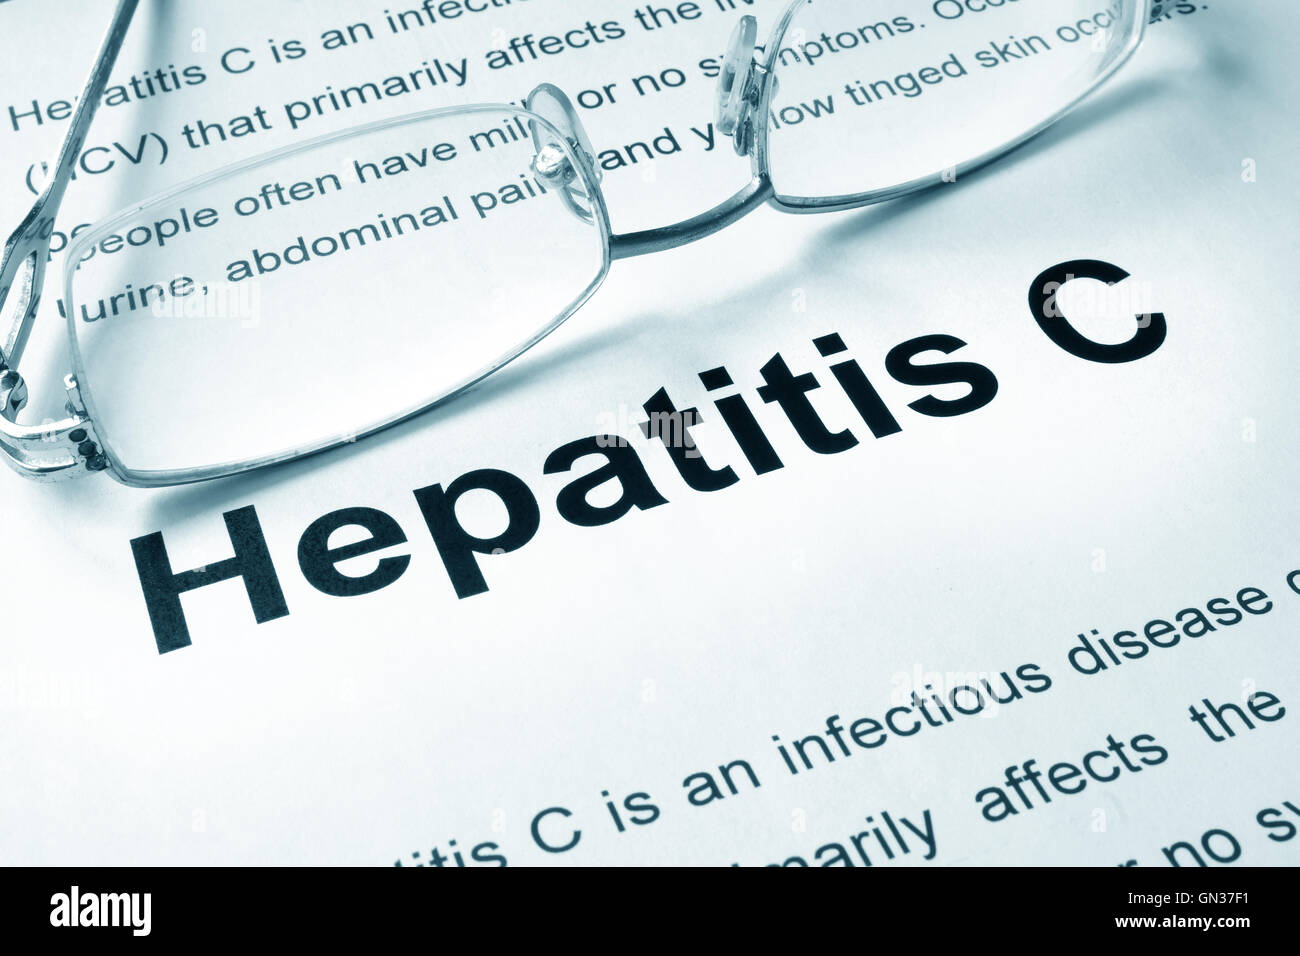 Hepatitis C written on a page. Medical concept. Stock Photo